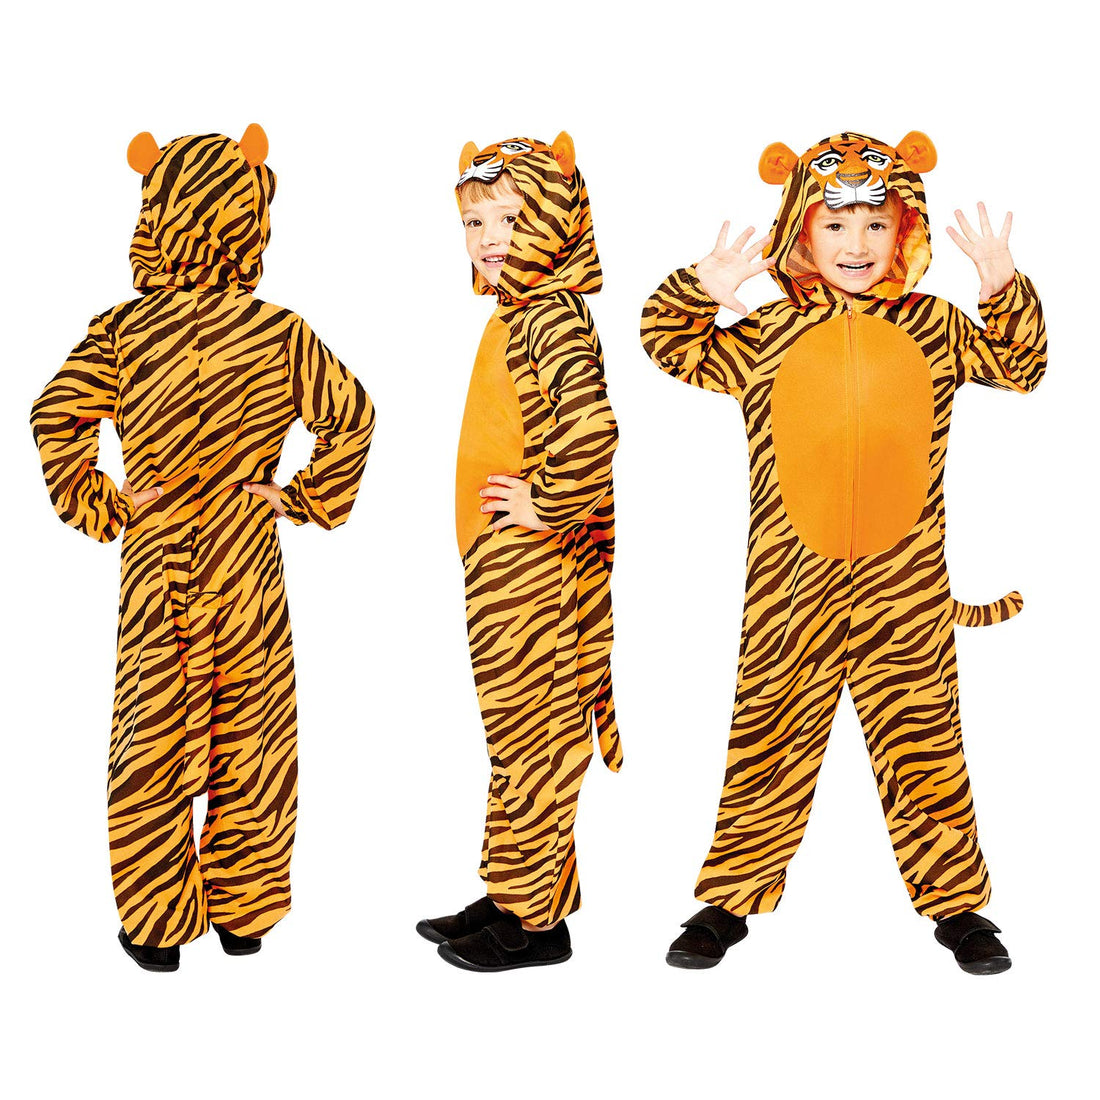 Amscan 9908793 - Kids Tiger Print Hooded Onesie World Book Day Fancy Dress Costume Age: 8-10 Yrs